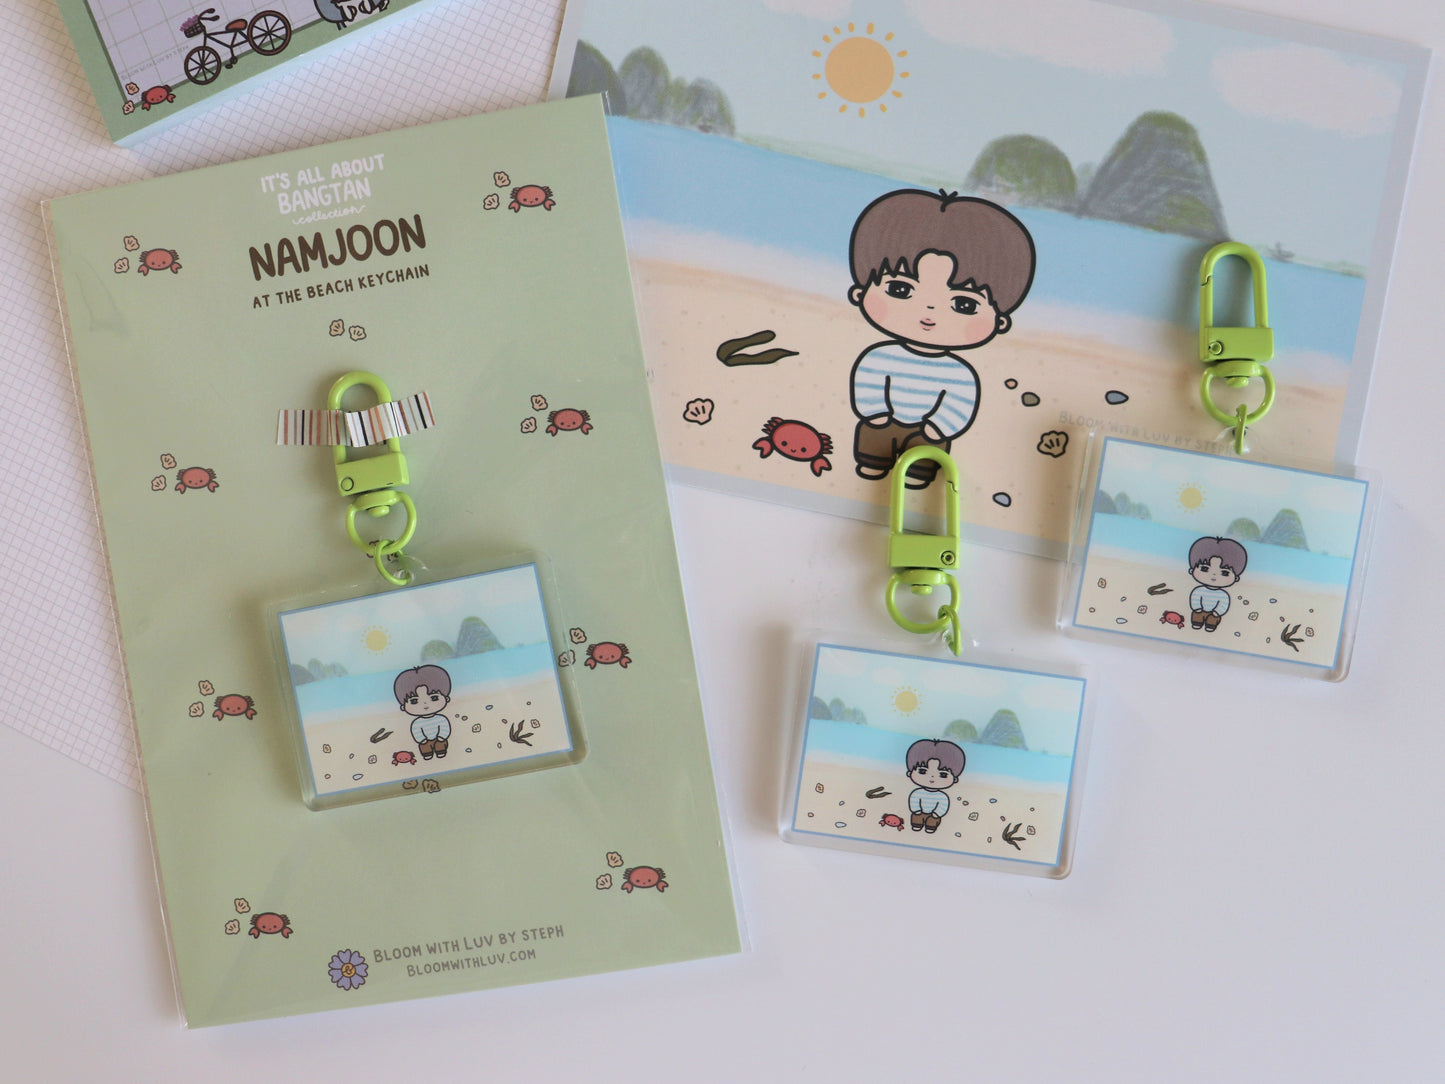 It's All About Namjoon FULL SET - [It's All About Bangtan Collection]